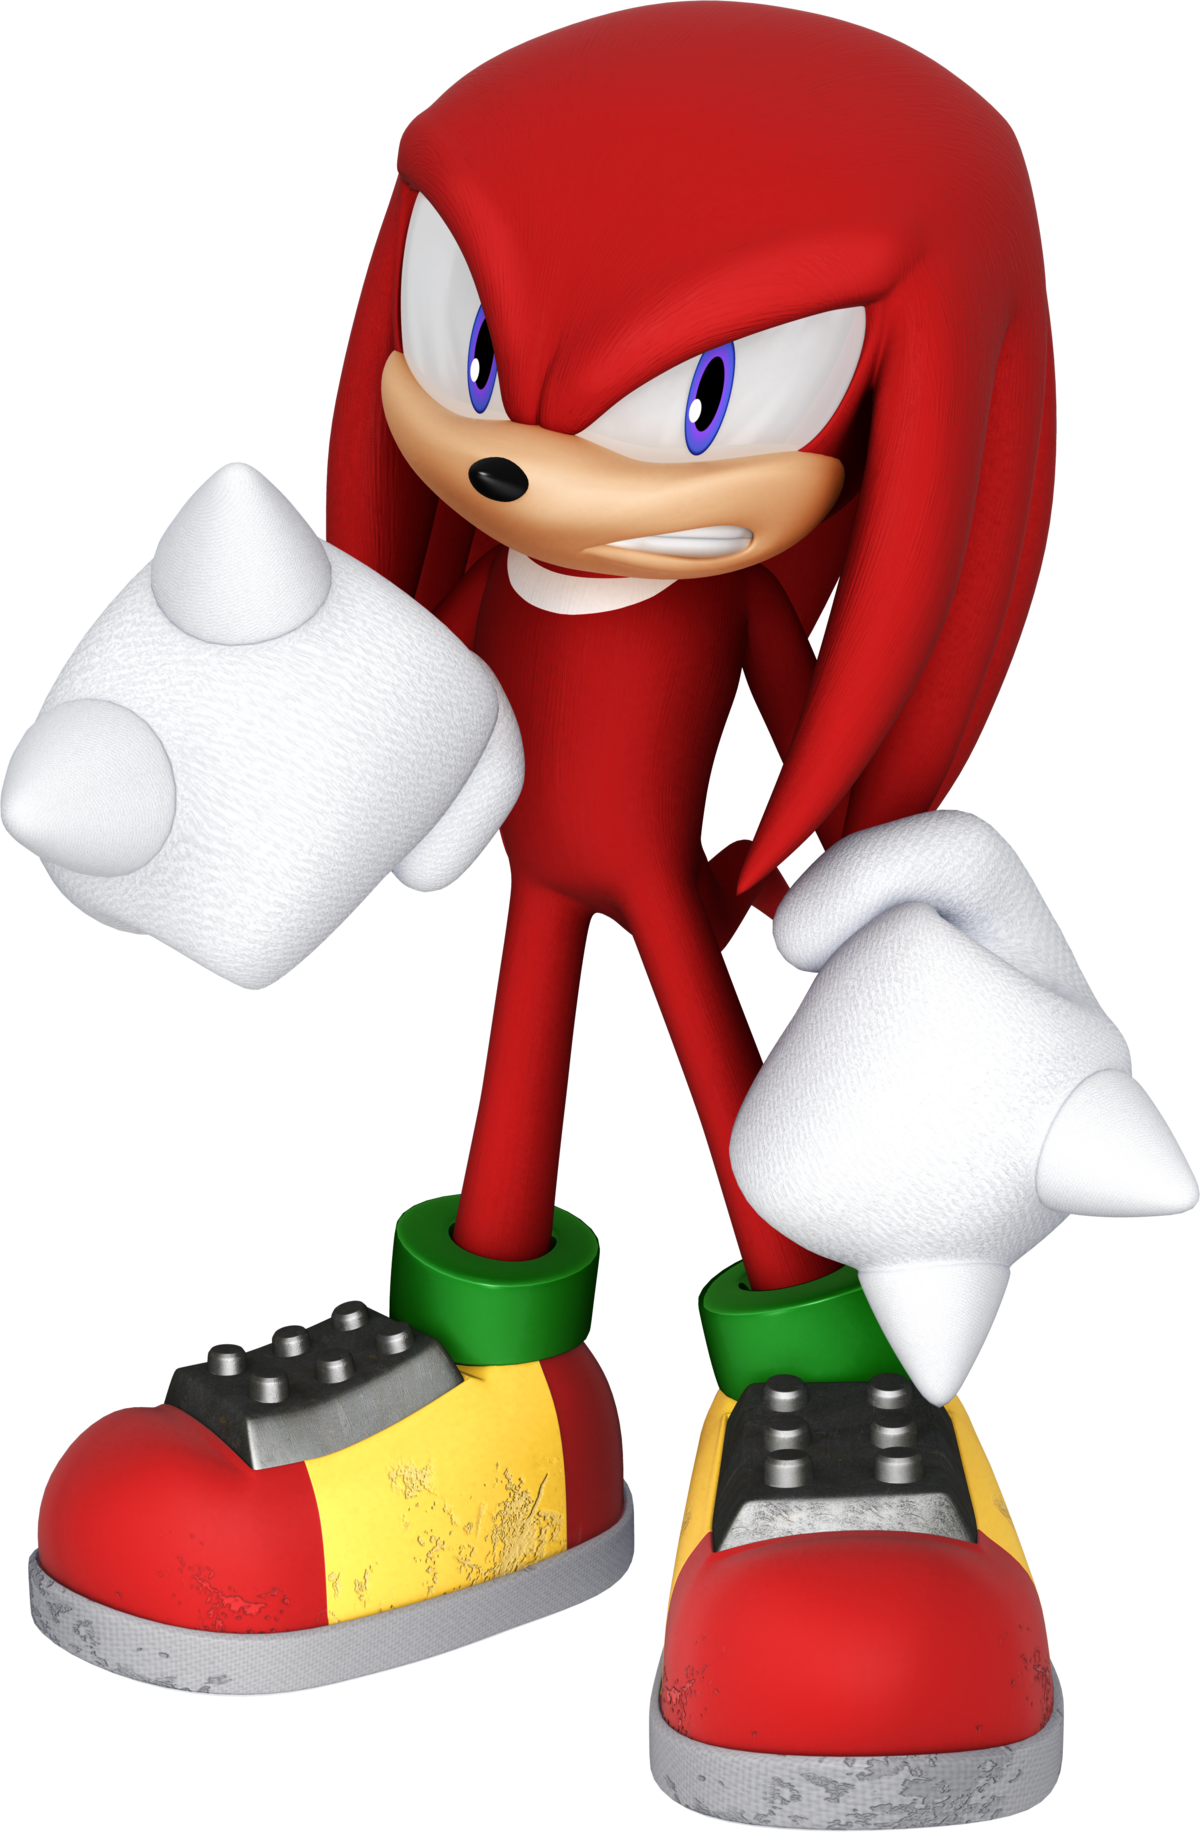 Sonic Advance 3 Tails Sonic The Hedgehog 3 Shadow The Hedgehog PNG,  Clipart, Angle, Animation, Area